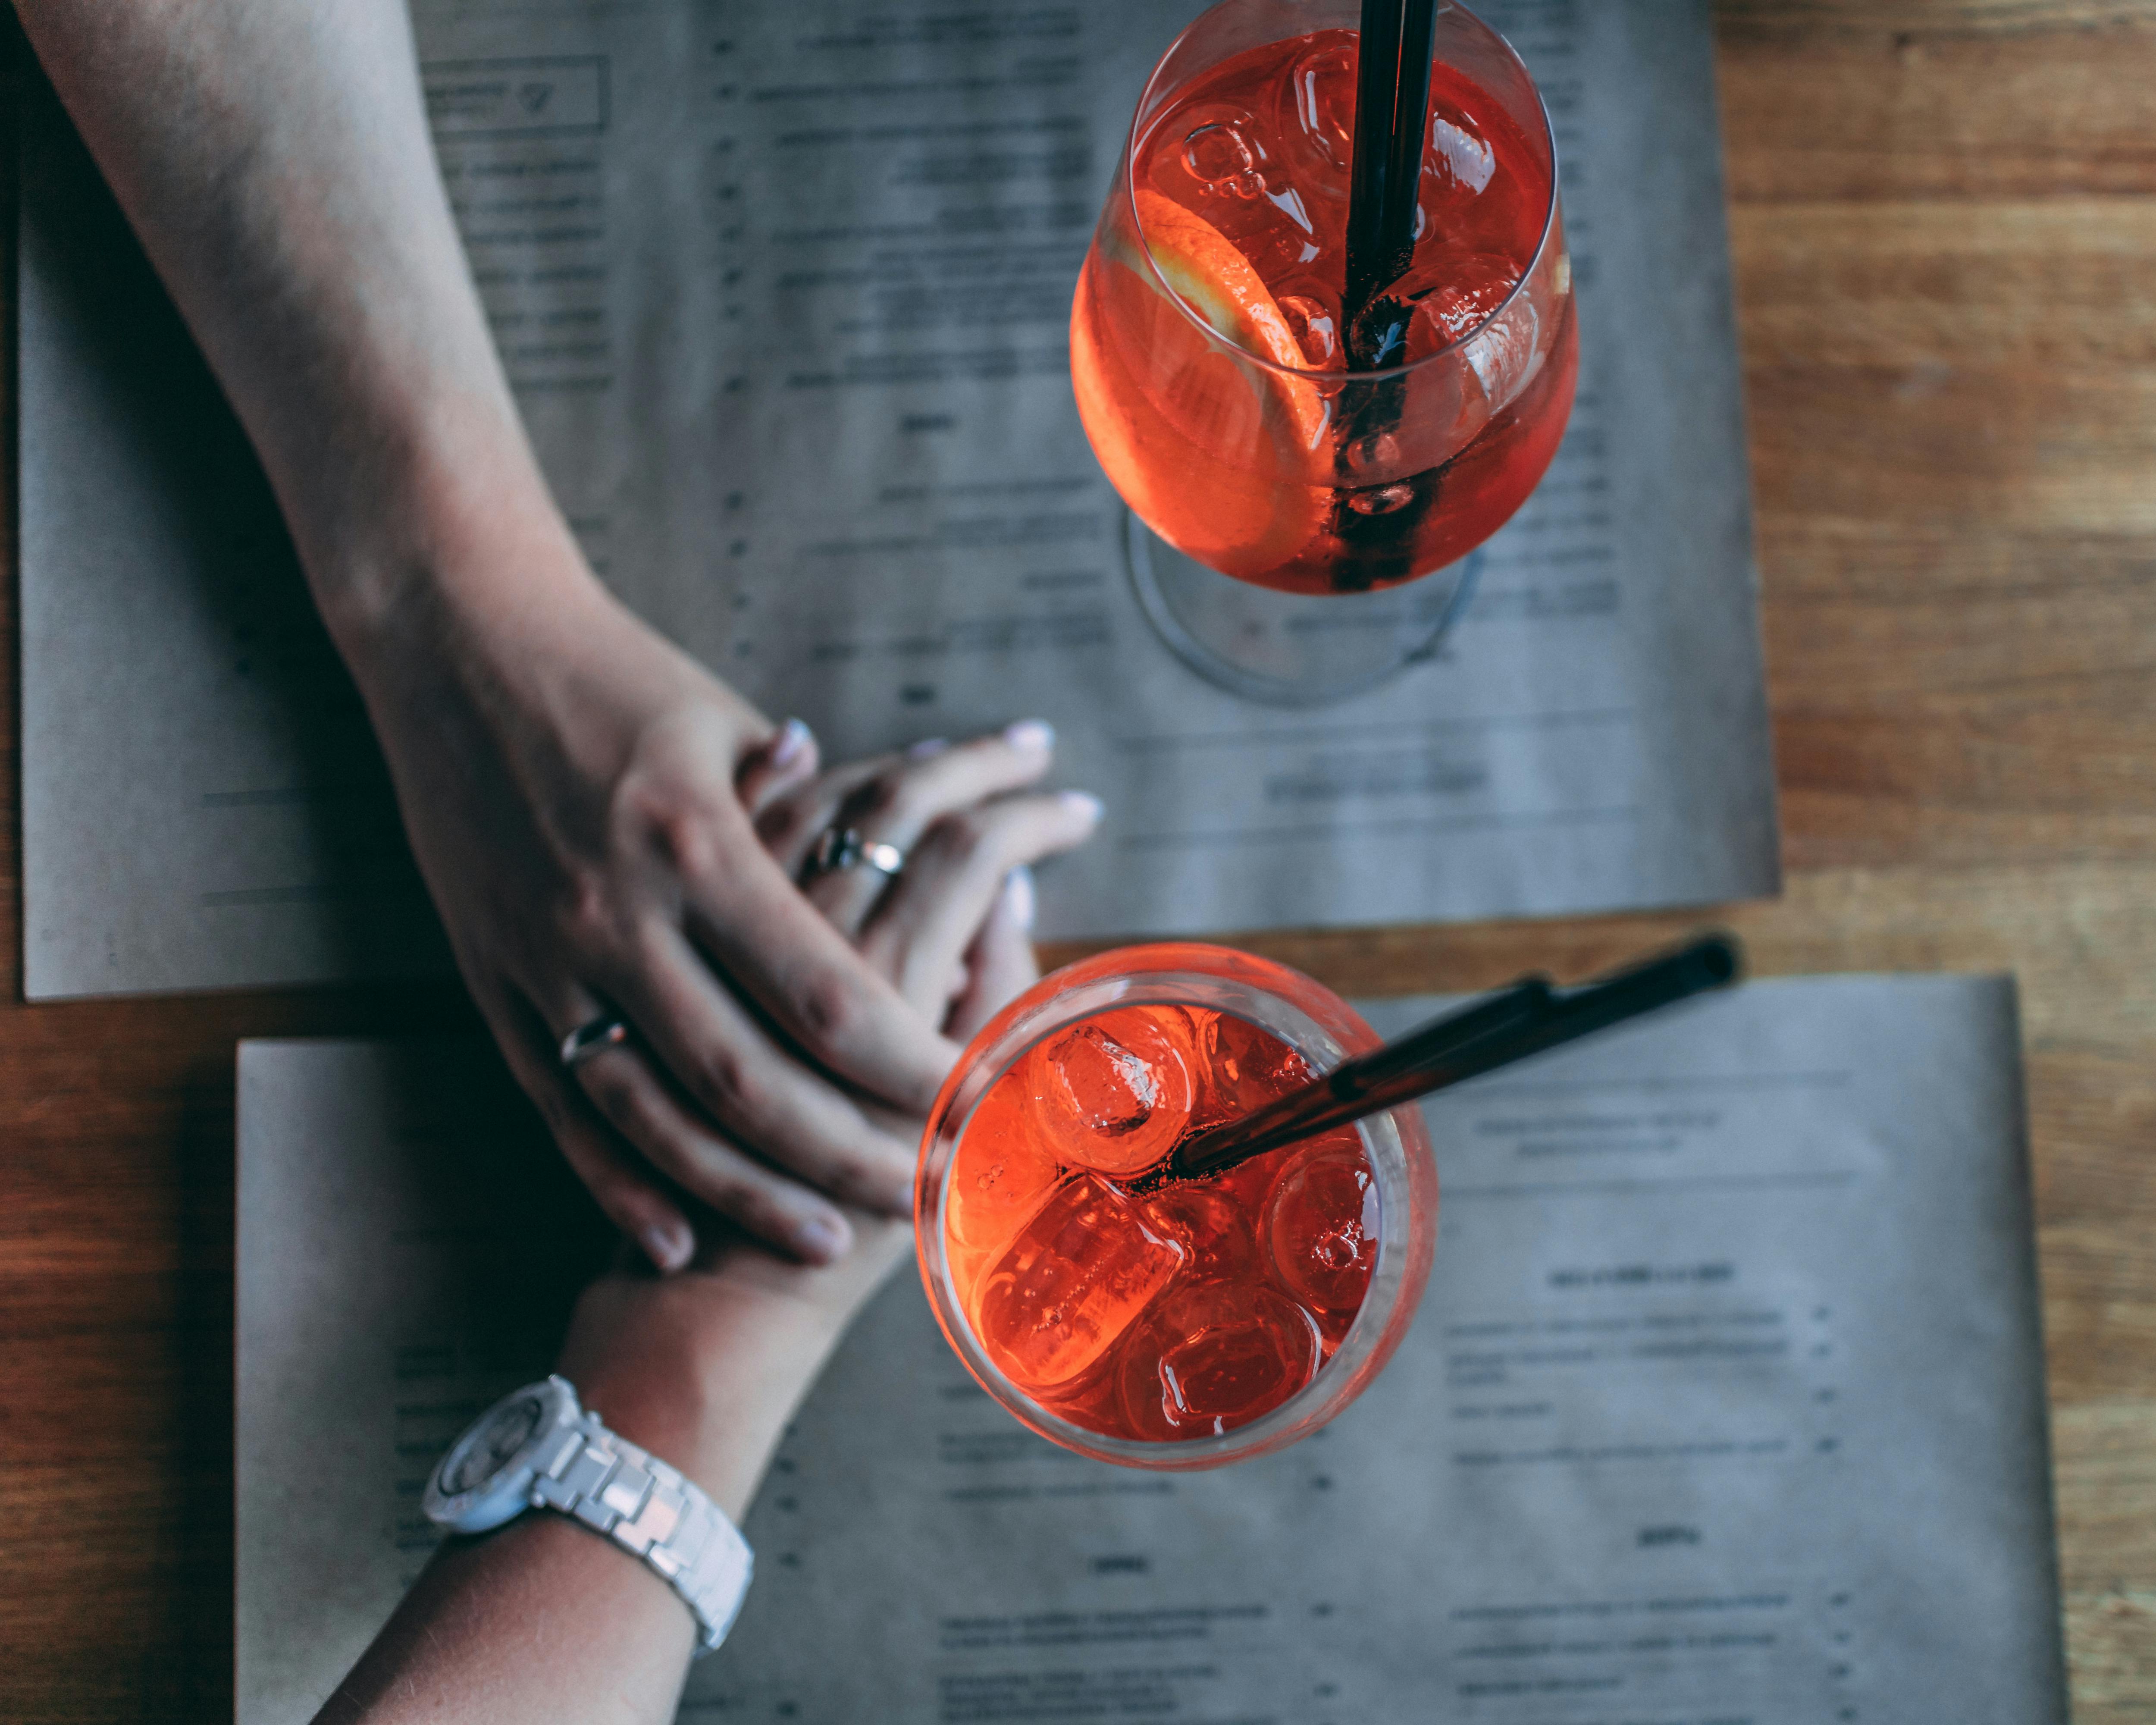 A couple holding hands across a restaurant table | Source: Pexels